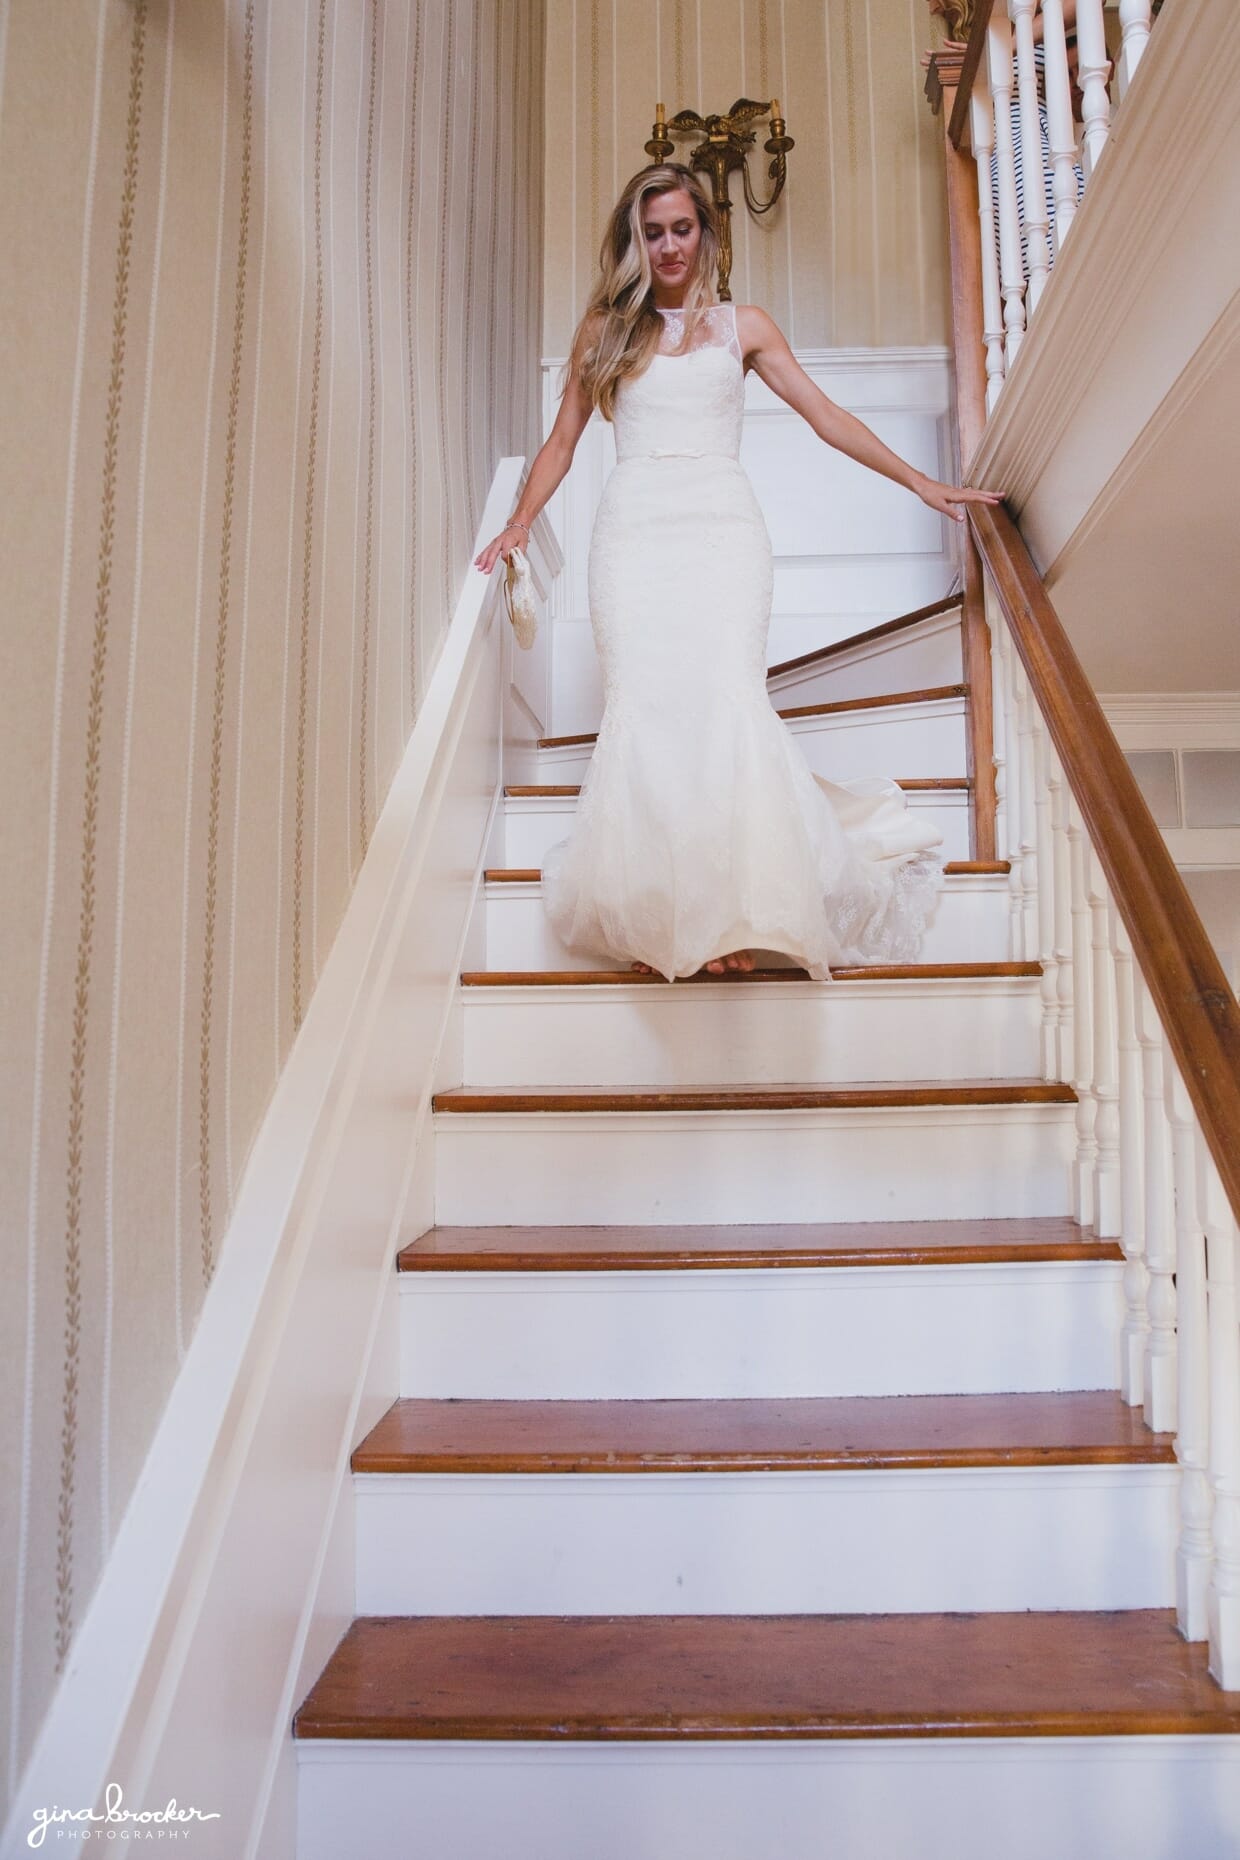 The bride walks down the stairs in her wedding dress on the morning of her Nantucket Wedding at the Westmoor Club